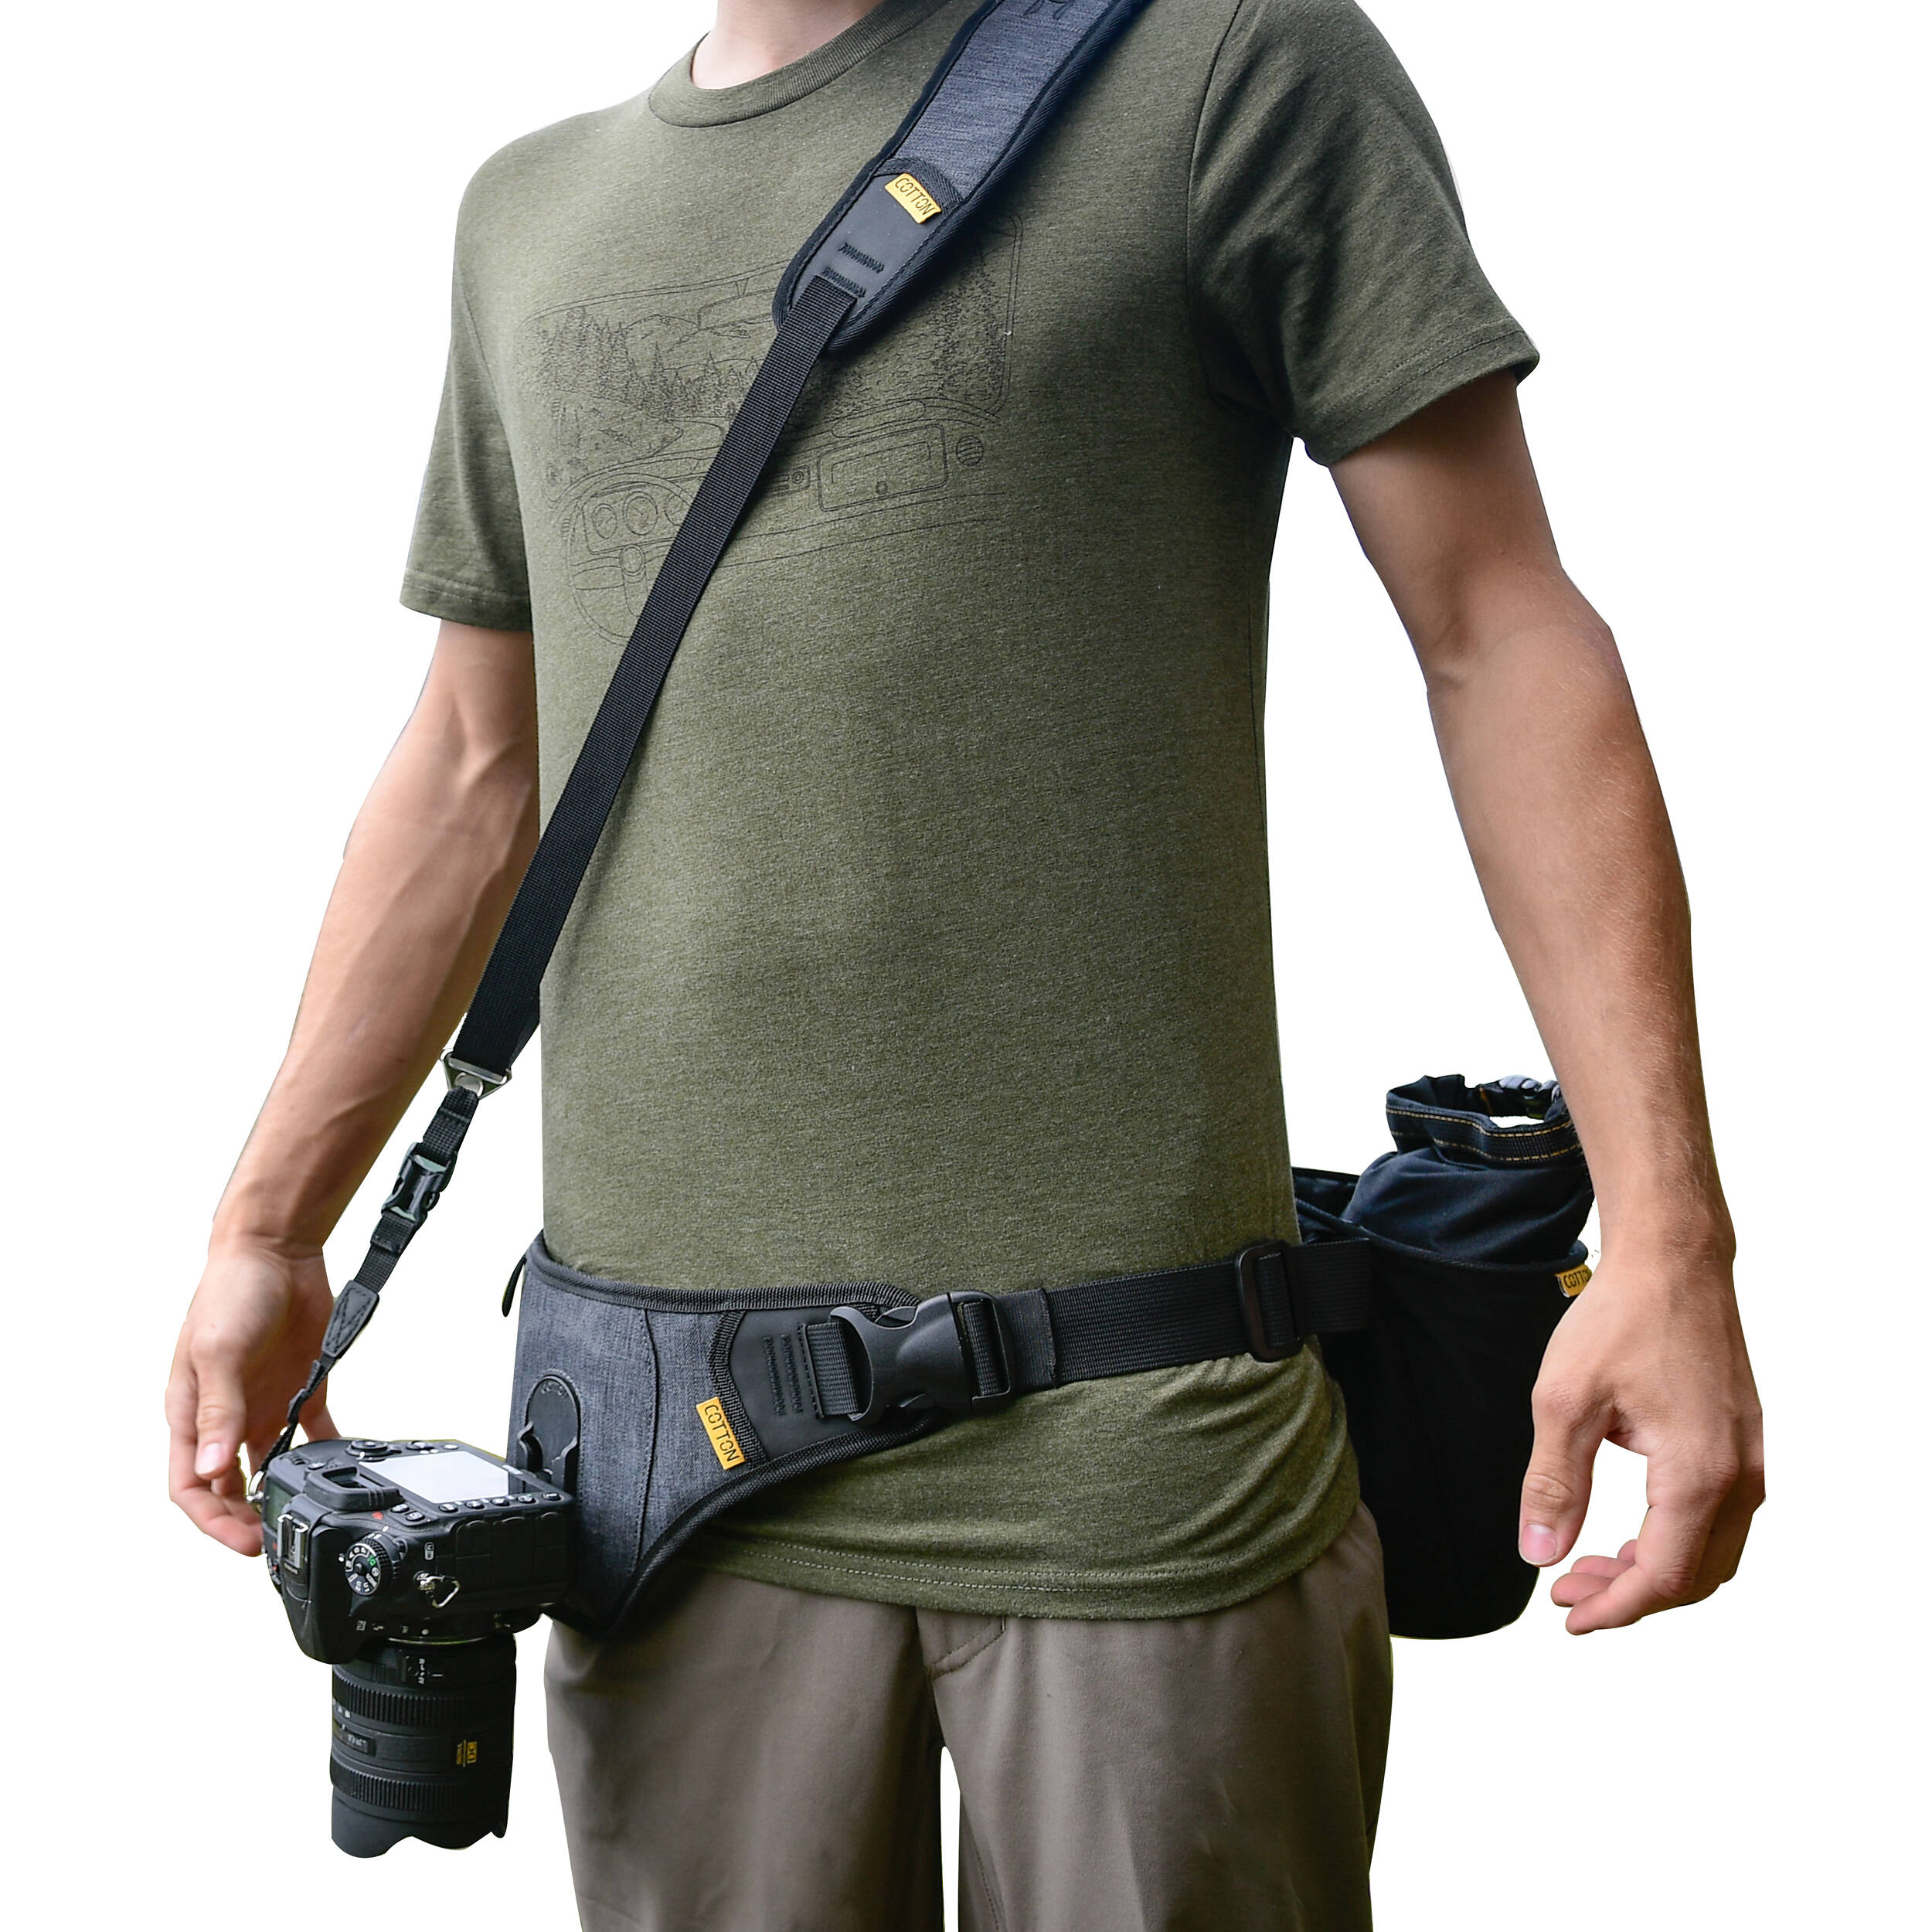 Cotton Carrier SLINGBELT 1-Camera Carrying System with Tether